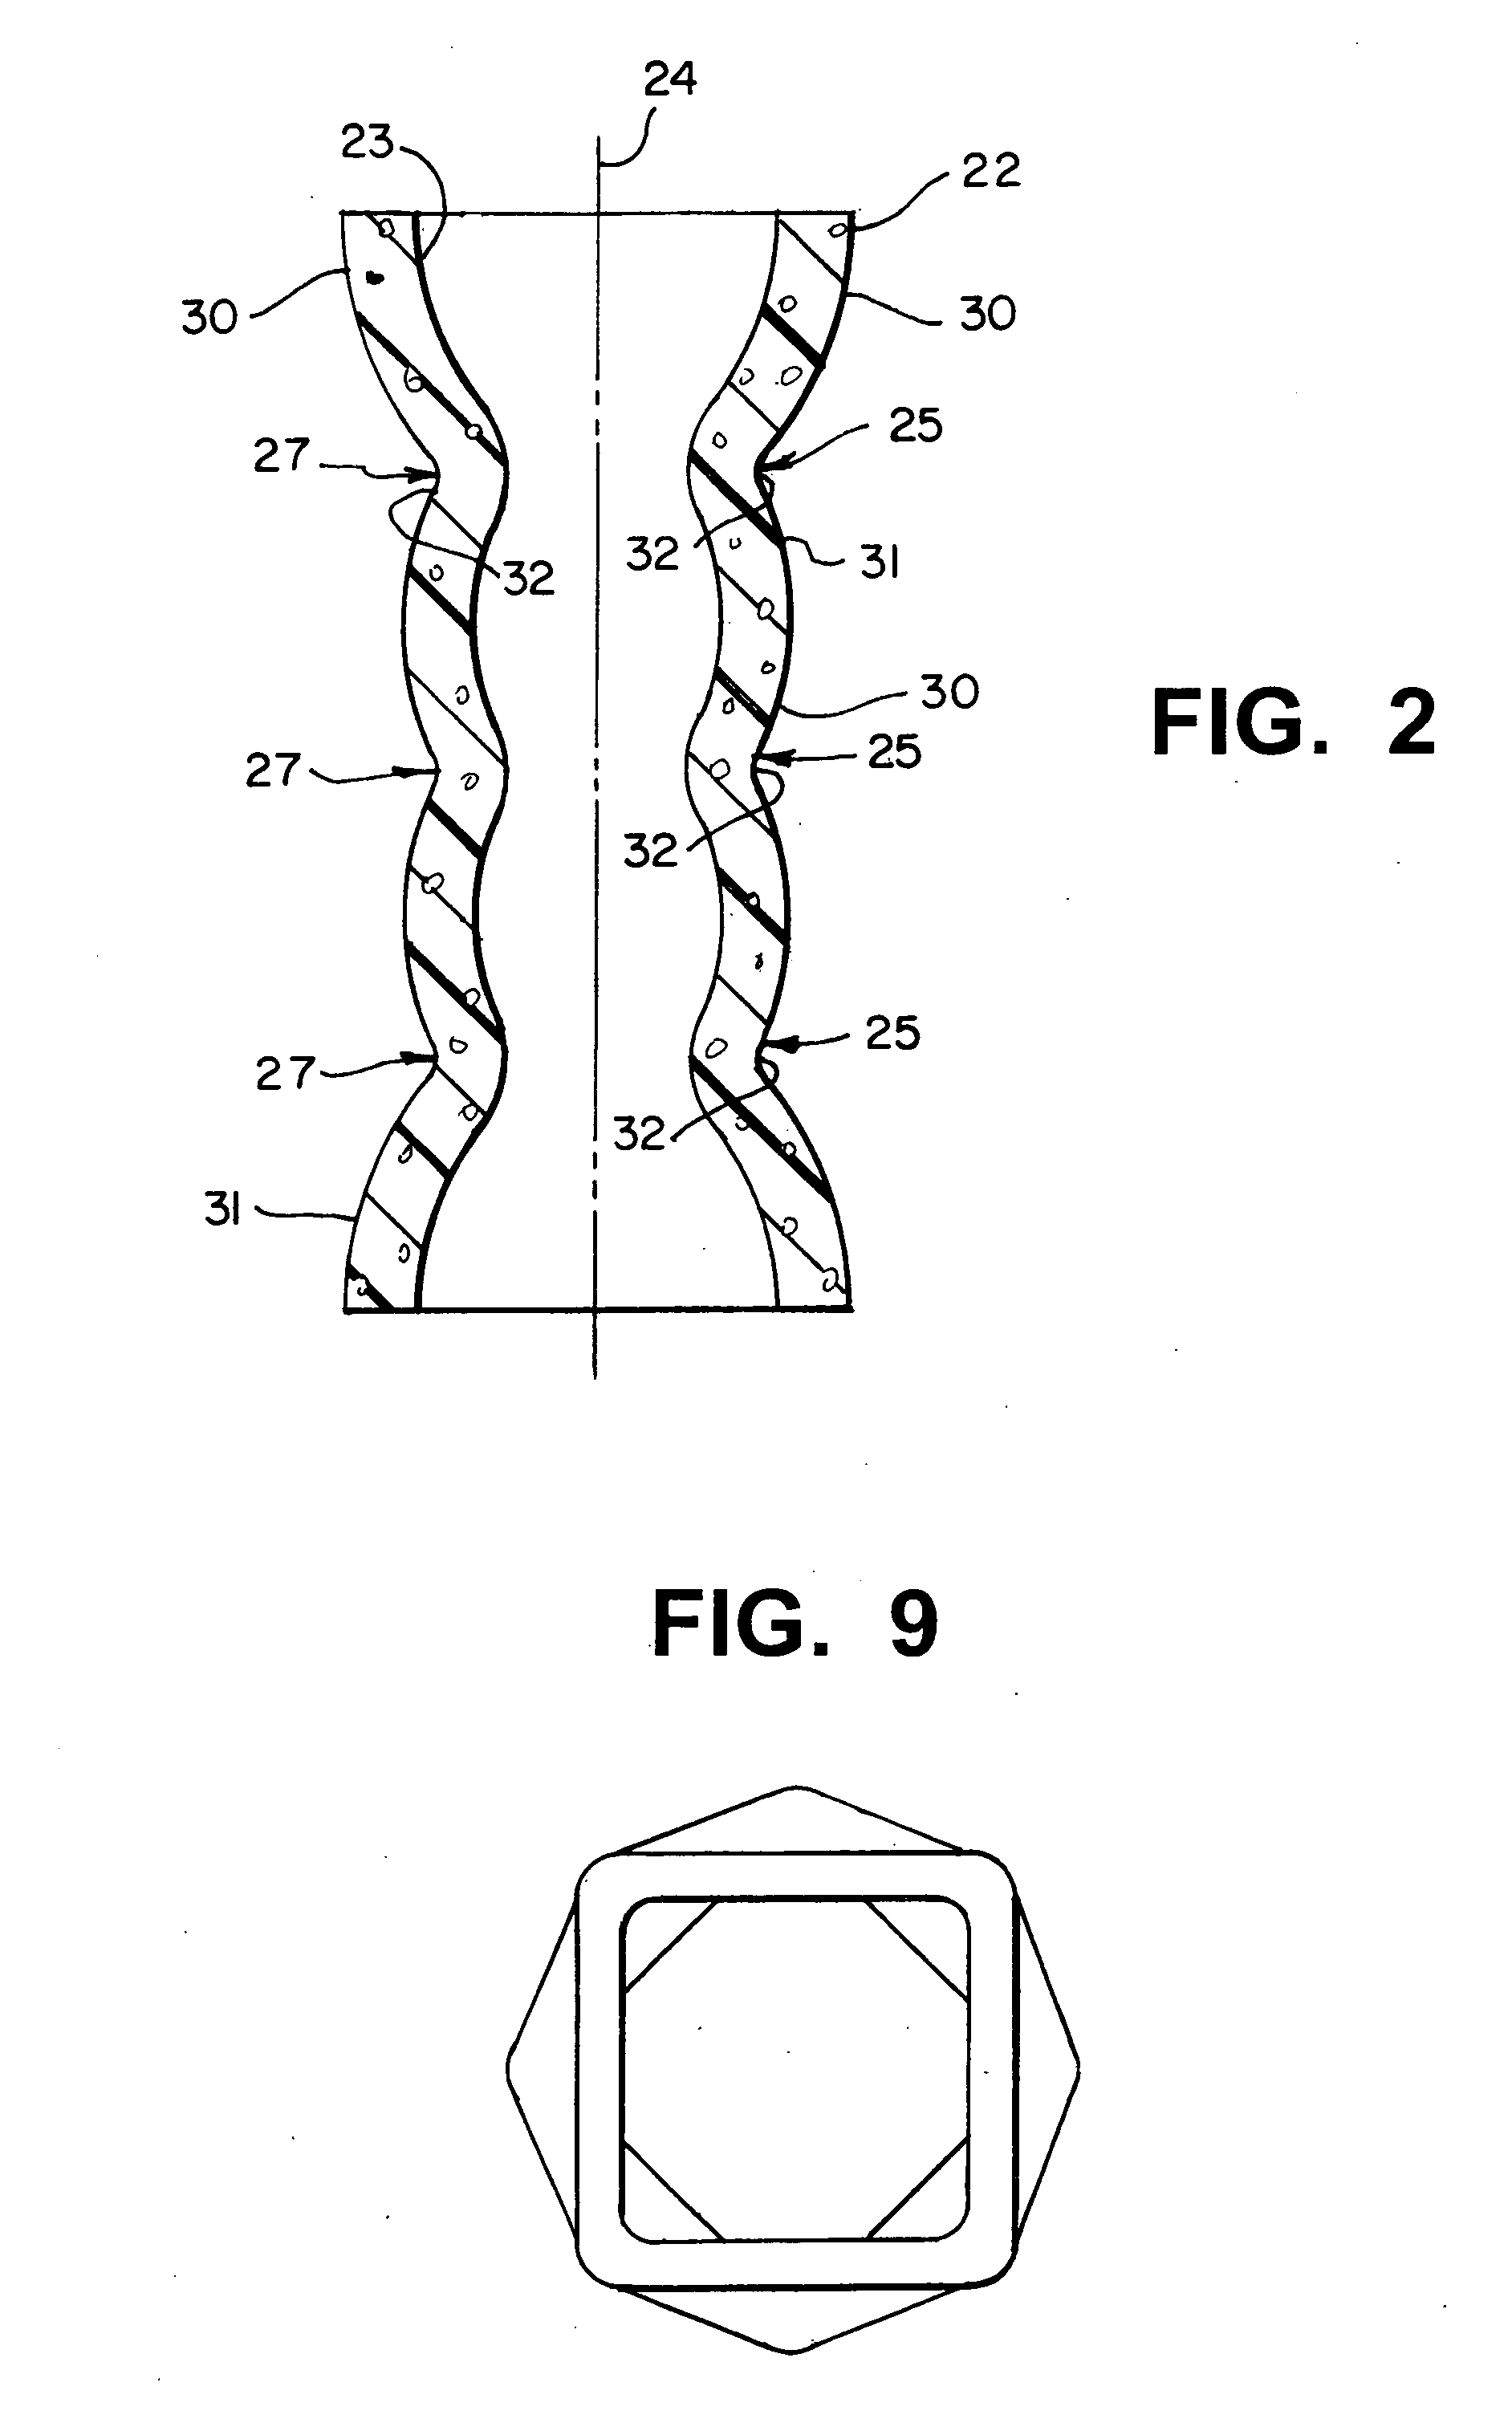 Load bearing or cushioning elements and method of manufacture